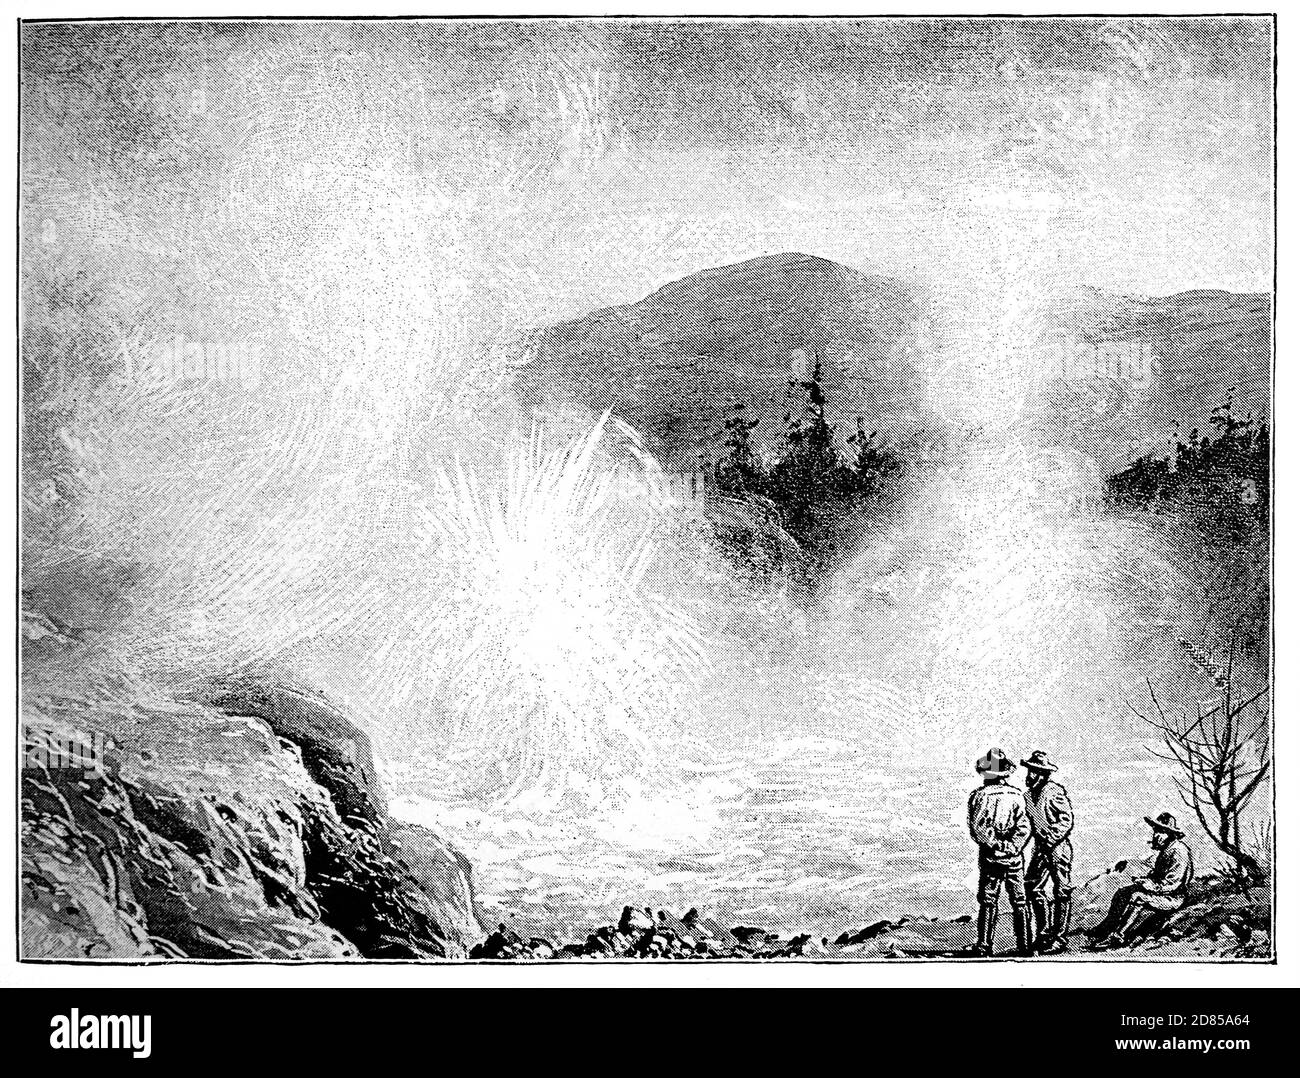 A 19th Century illustration of a geyser in the Taupo Volcanic Zone is located on New Zealand's North Island. In the beginning of the 20th century, the largest geyser ever known, the Waimangu Geyser existed in this zone. It began erupting in 1900 and erupted periodically for four years until a landslide changed the local water table. Eruptions of Waimangu would typically reach 160 metres (520 ft) and some superbursts are known to have reached 500 metres (1,600 ft). Stock Photo